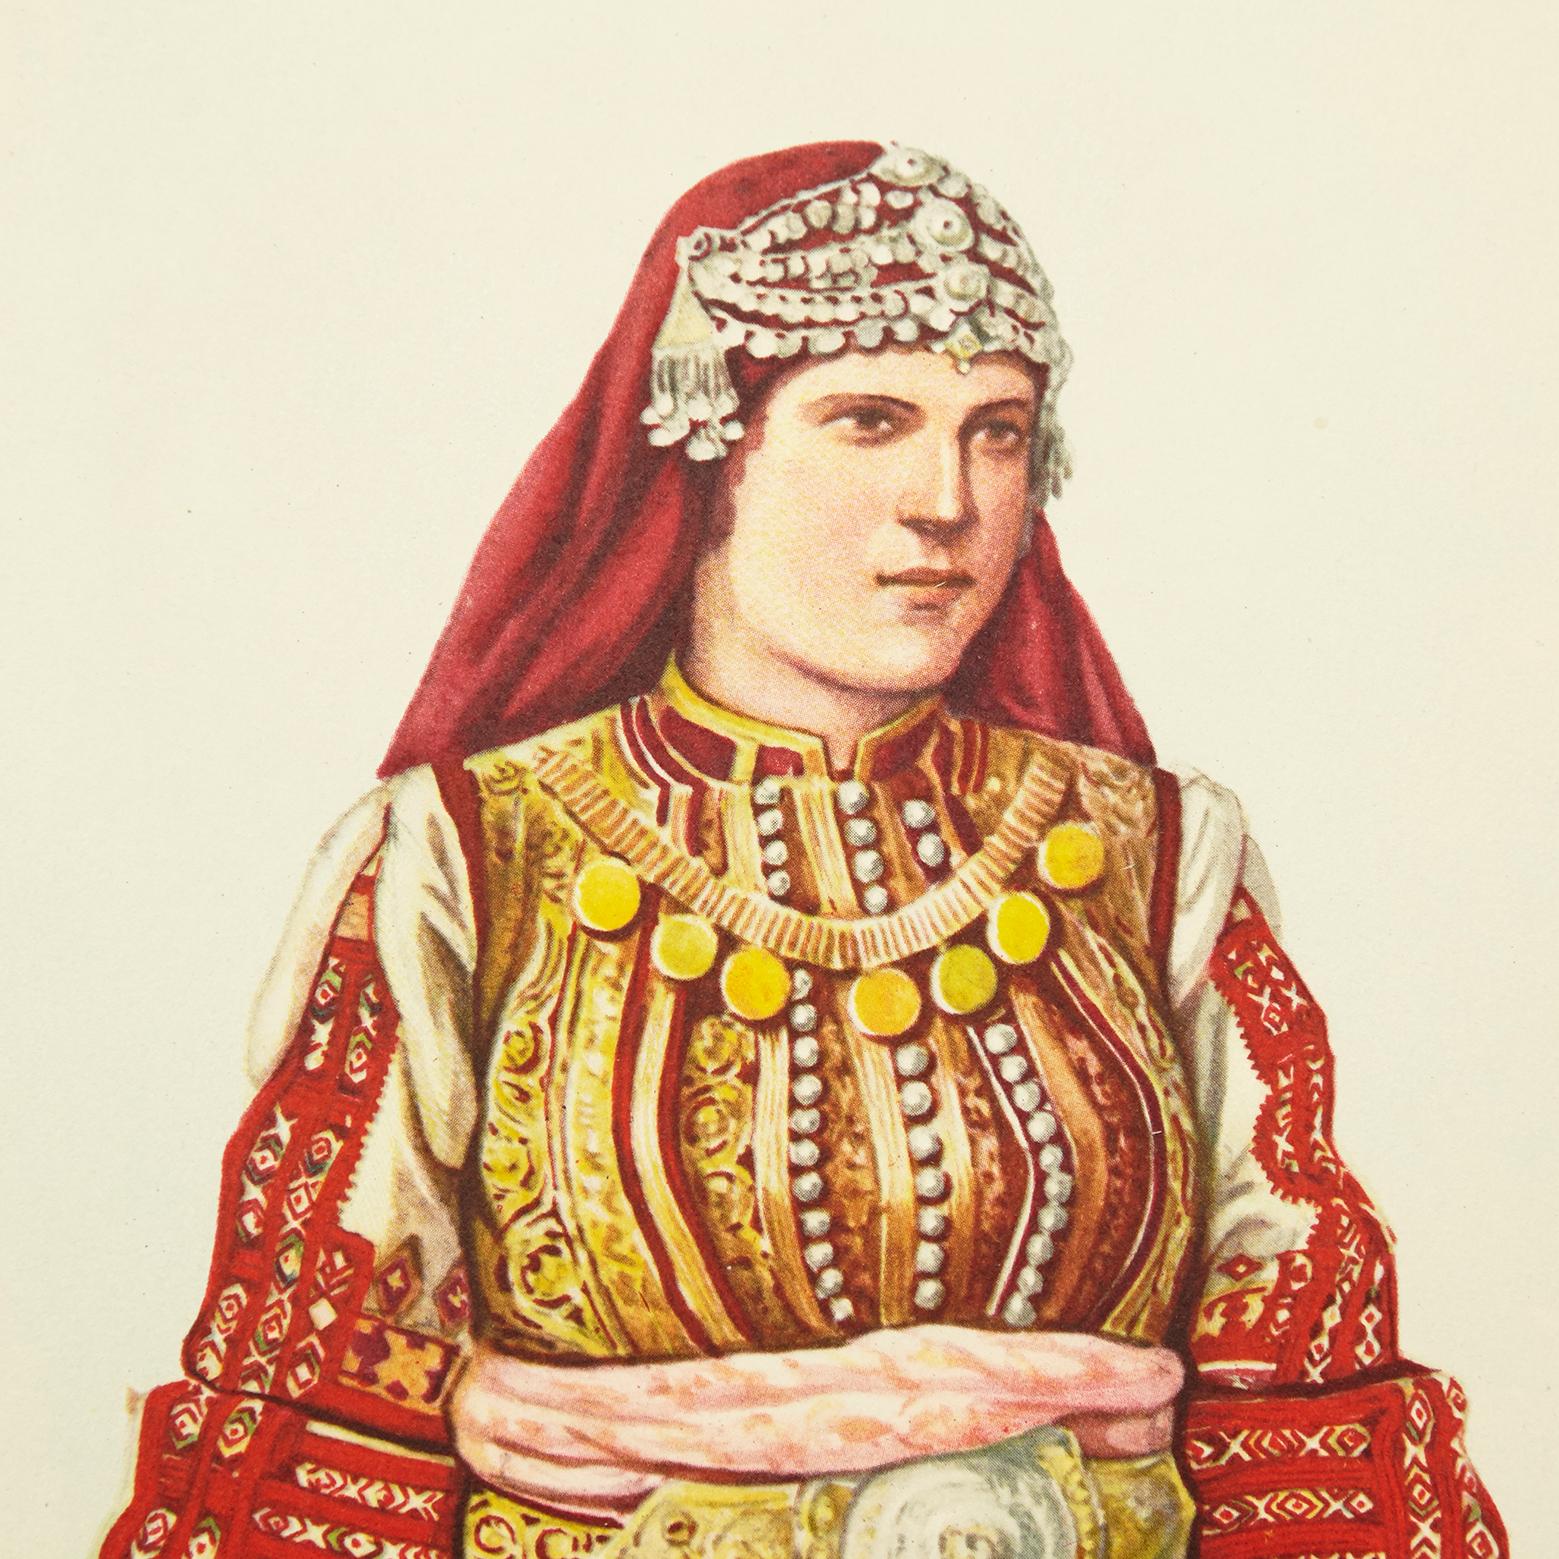 Macedonian National Dresses of Macedonia Illustrated Drawing in Plate, 1963